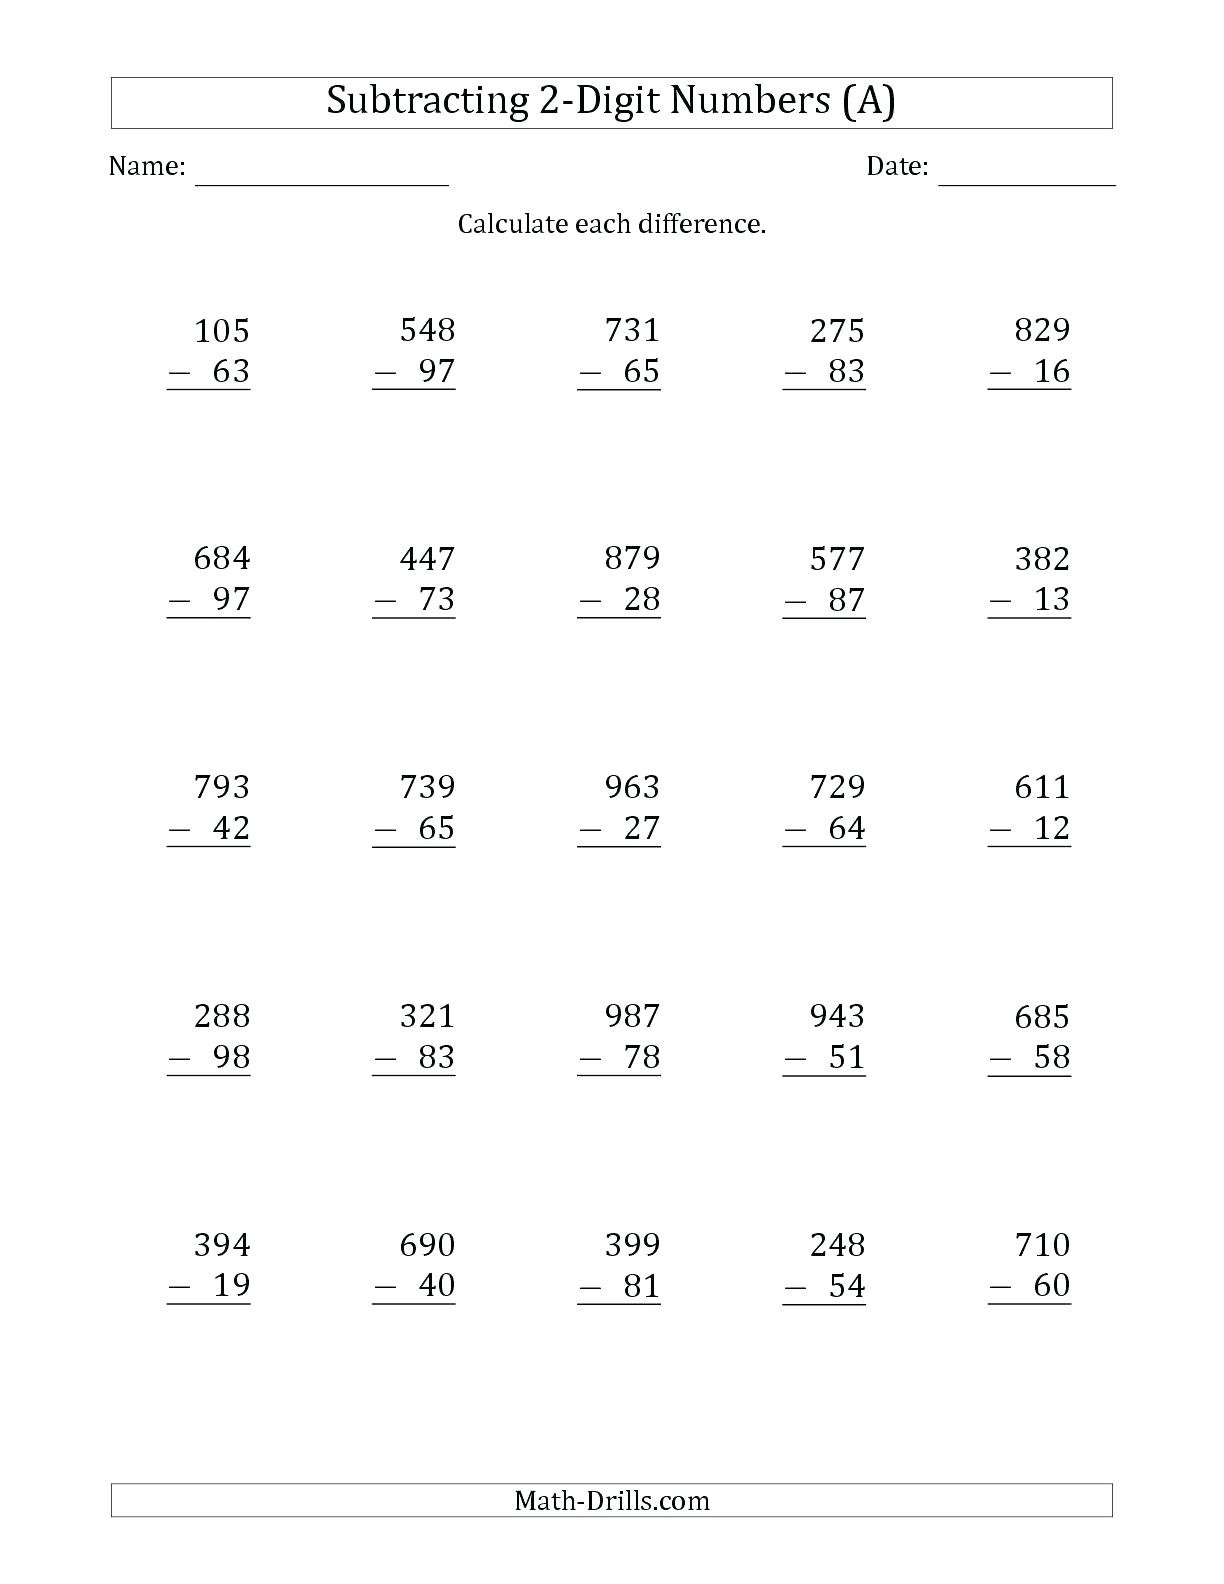 multiplying-and-dividing-decimals-by-multiples-of-10-worksheets-1000-images-about